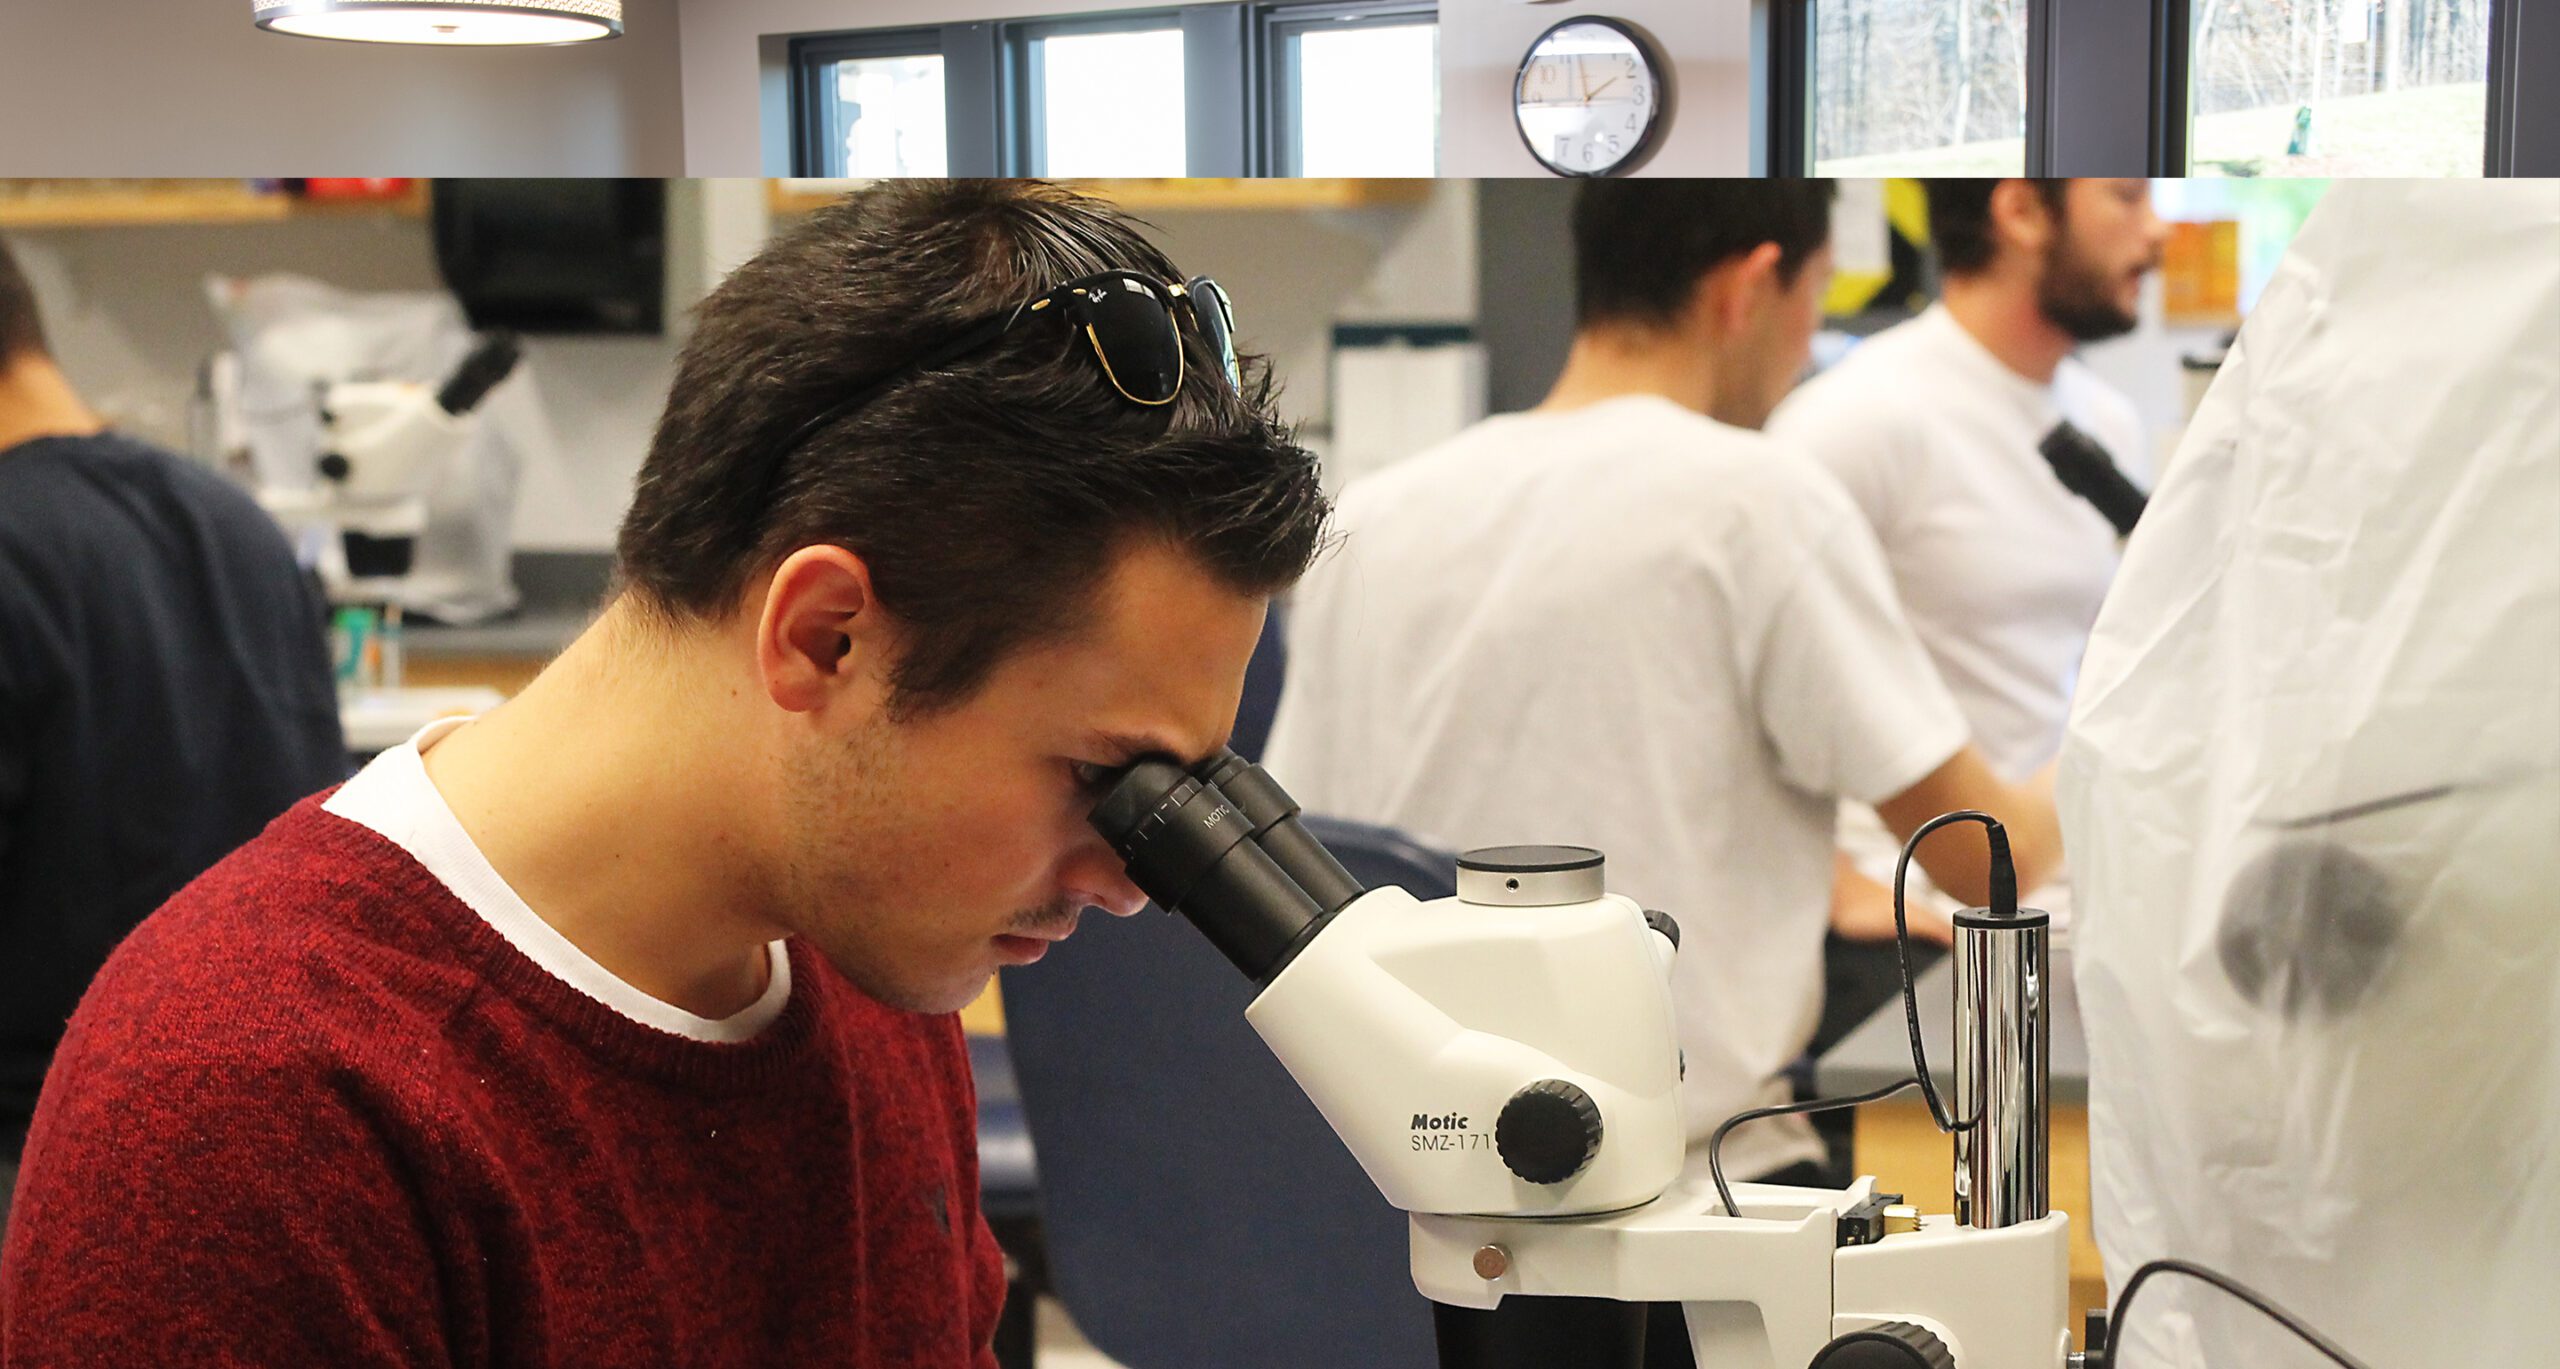 Assumption College students conducts research in one of the labs in the Testa Science Center.